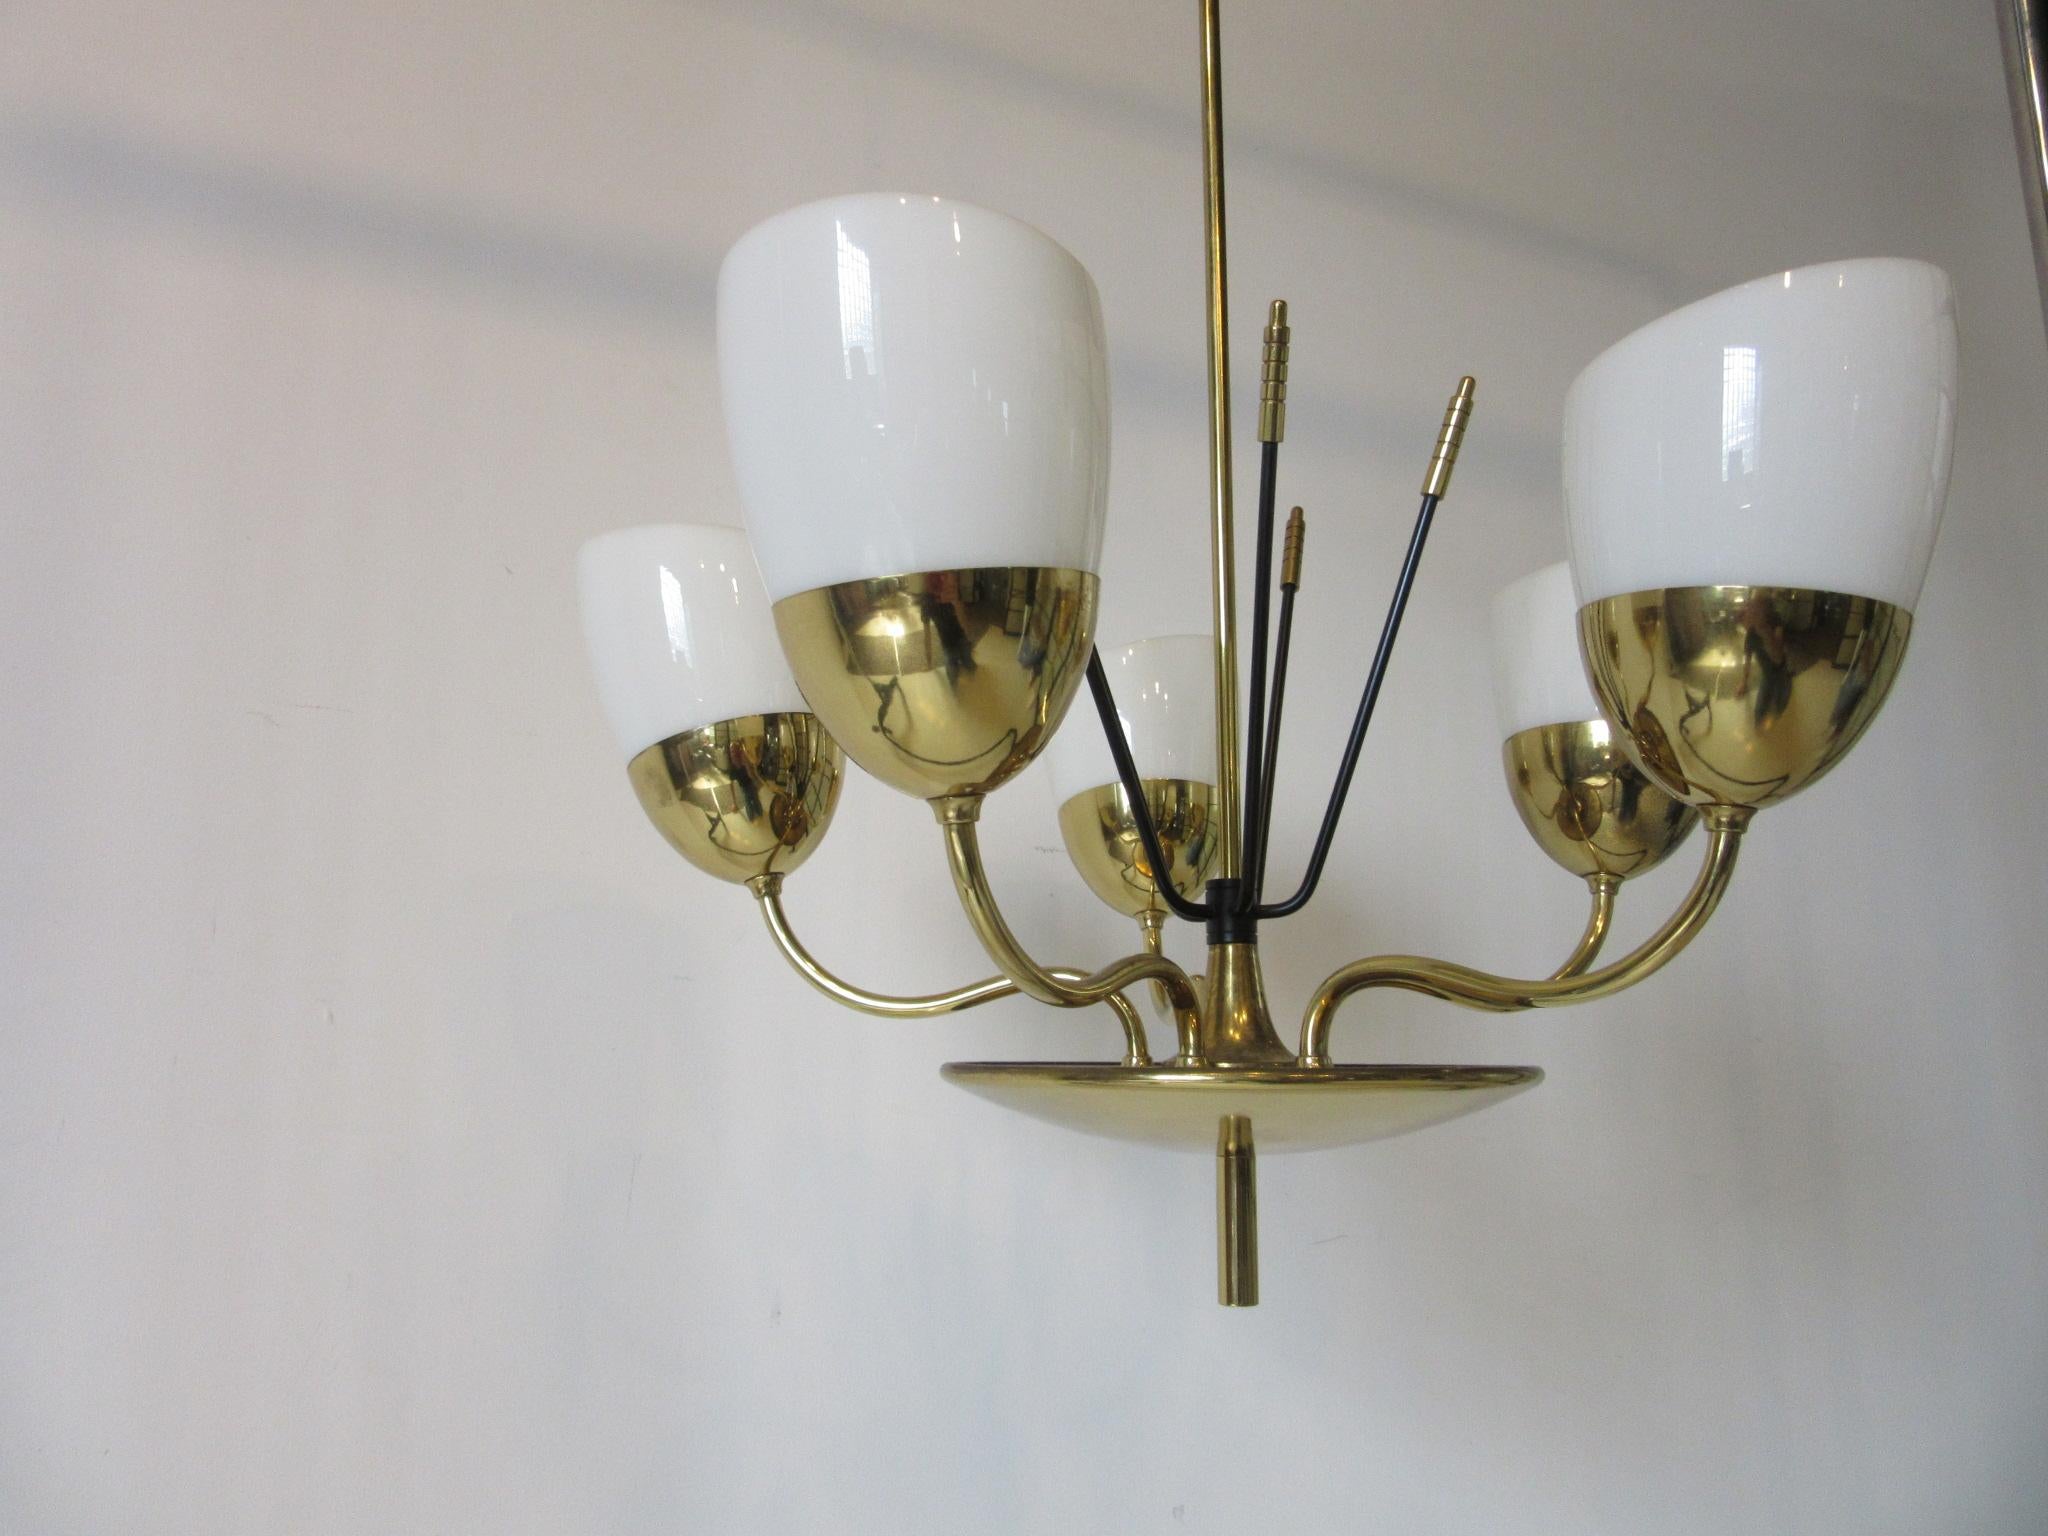 A fine and well crafted brass and milk glass chandelier with six arms, removable shades and detailed stems that come out of the base. Retains the manufactures label made by the Majestic M.S.& S. Company New York. Formally the Majestic Lamp and radio